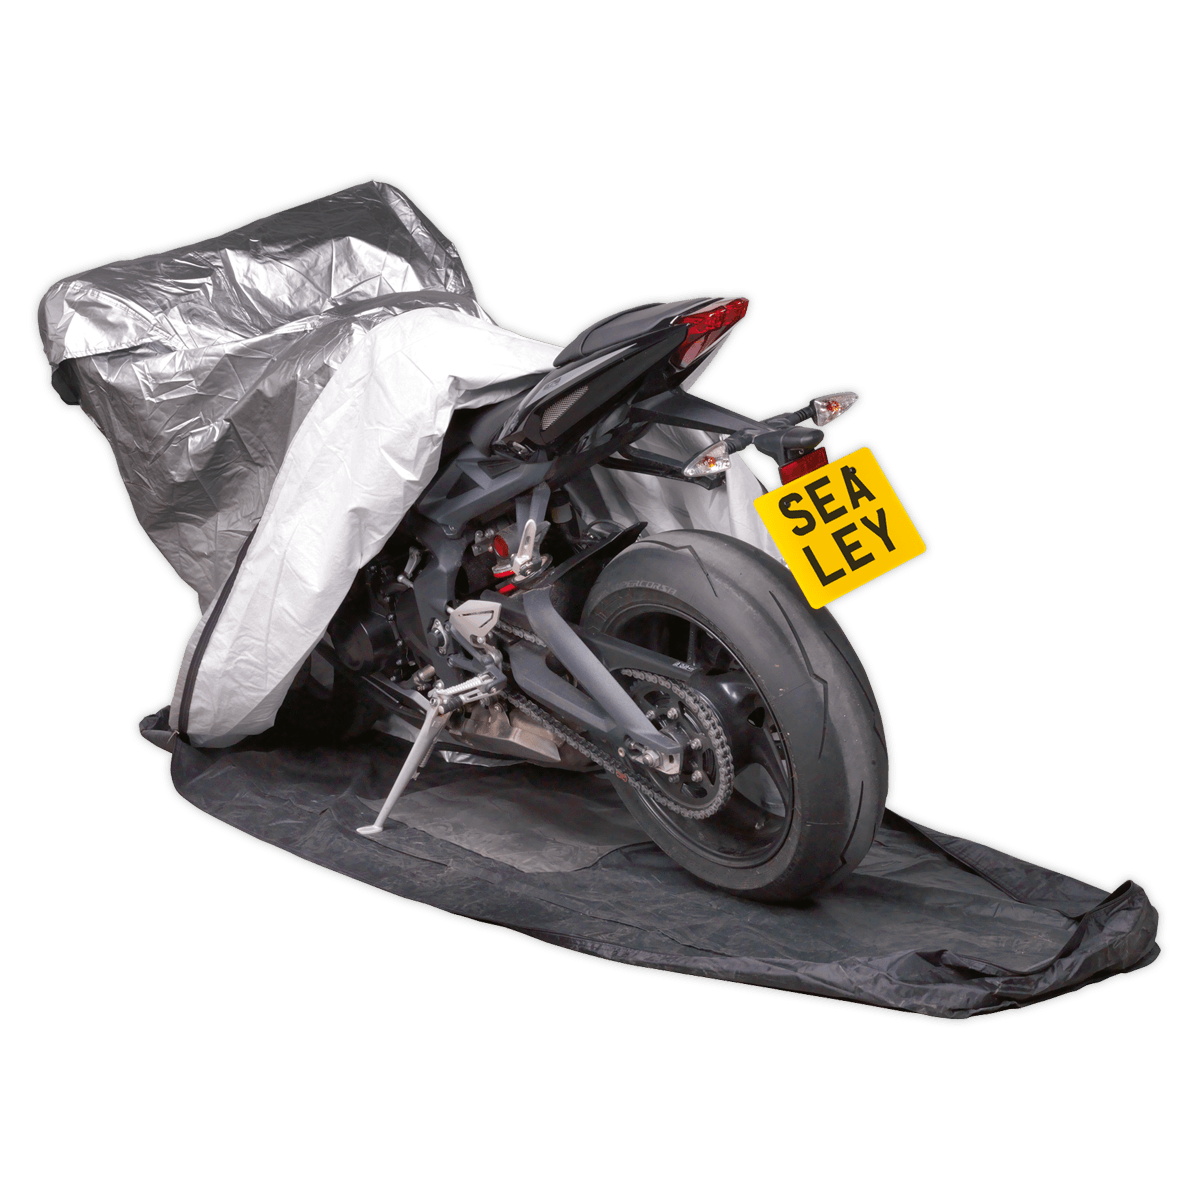 Motorcycle Coverall - Medium with Solar Panel Pocket